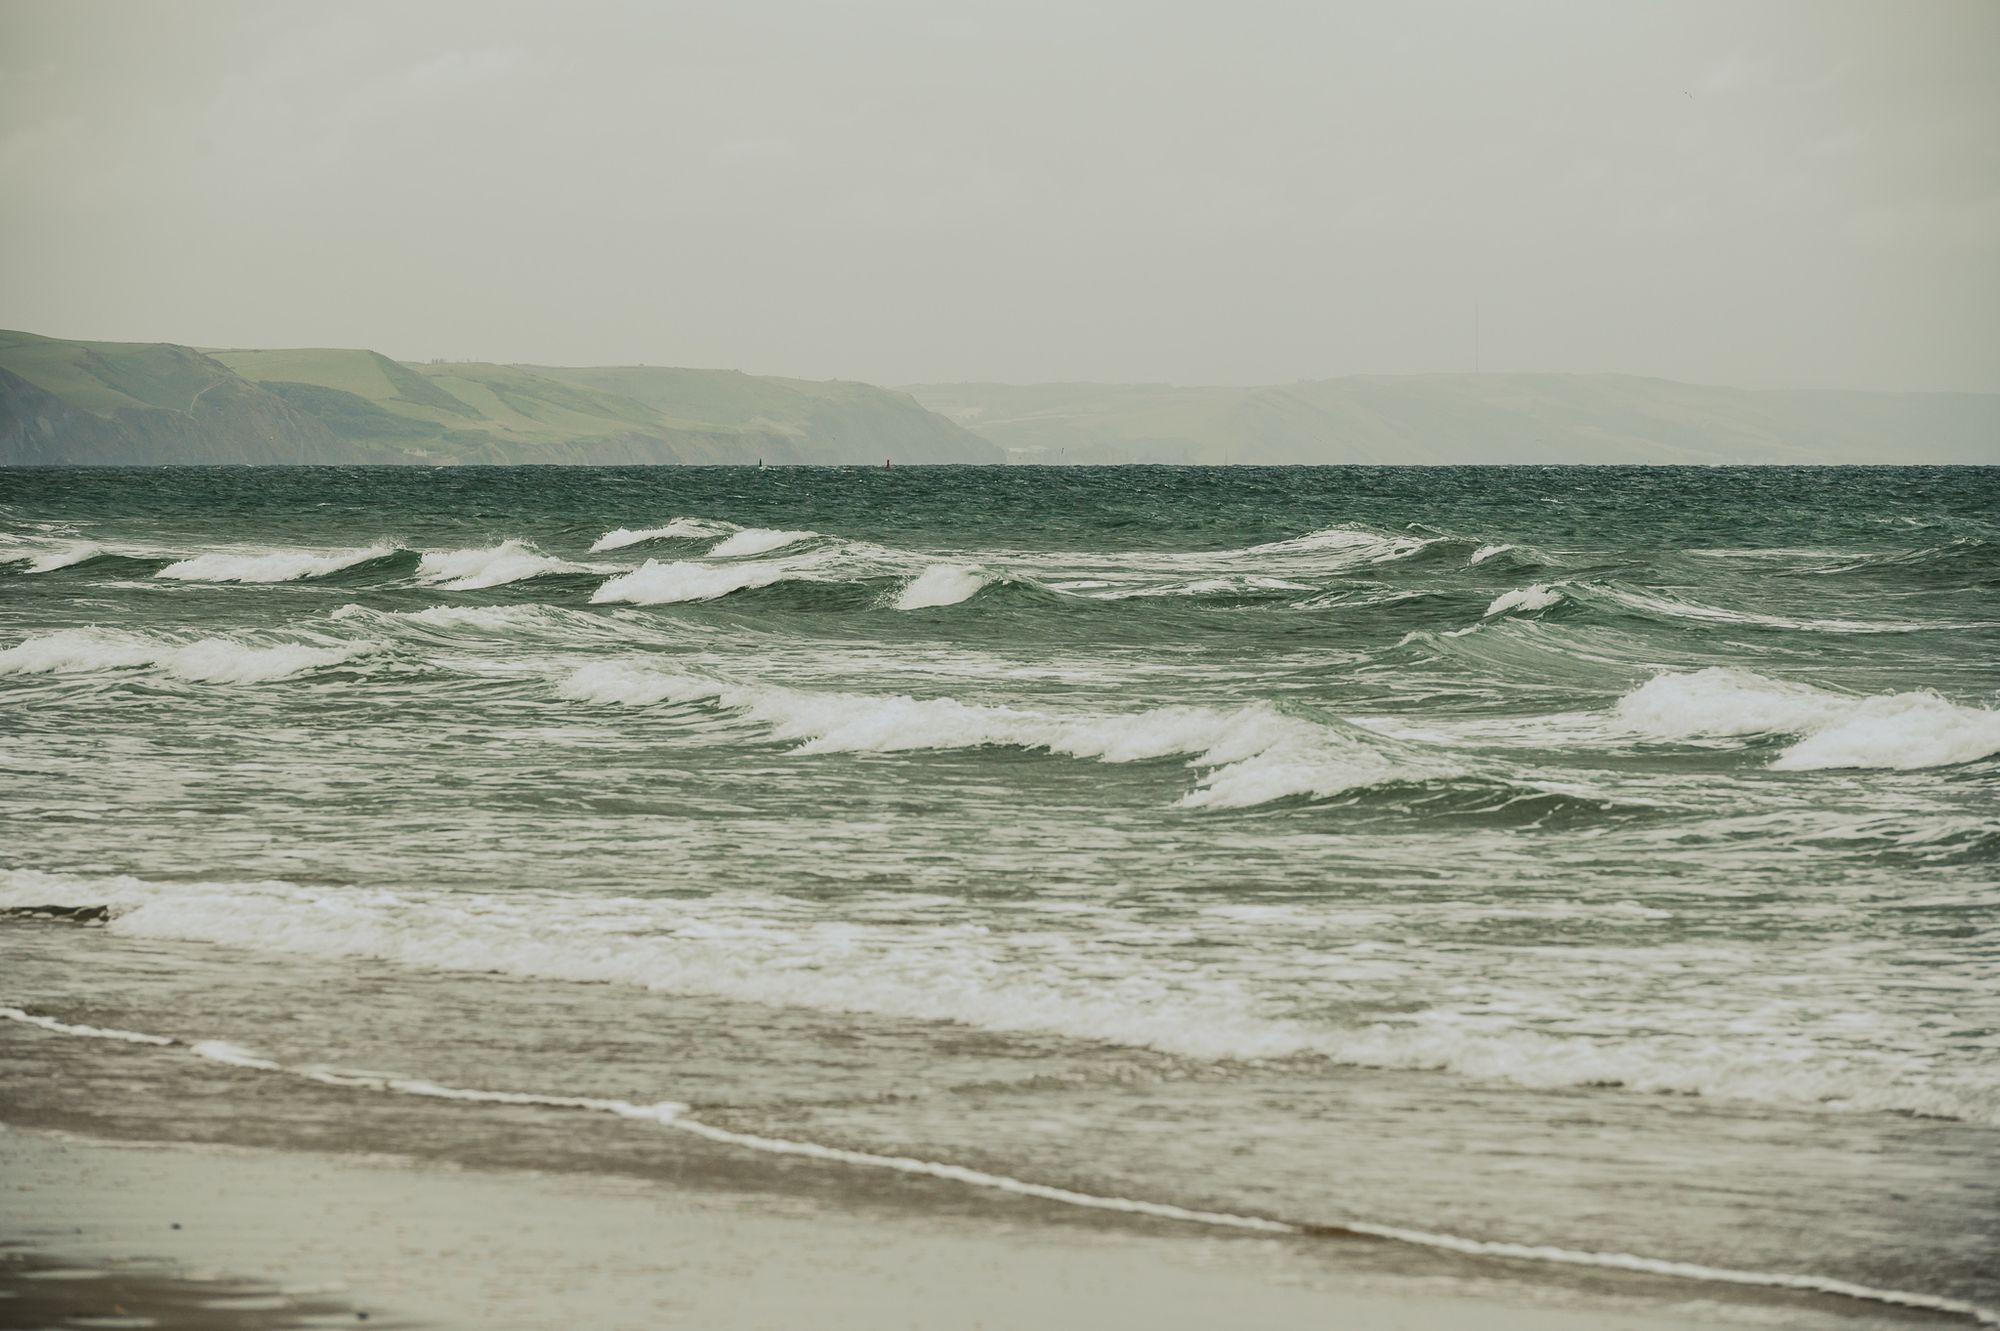 Large waves crashing onto a beach on an overcast day with big hills on the horizon.